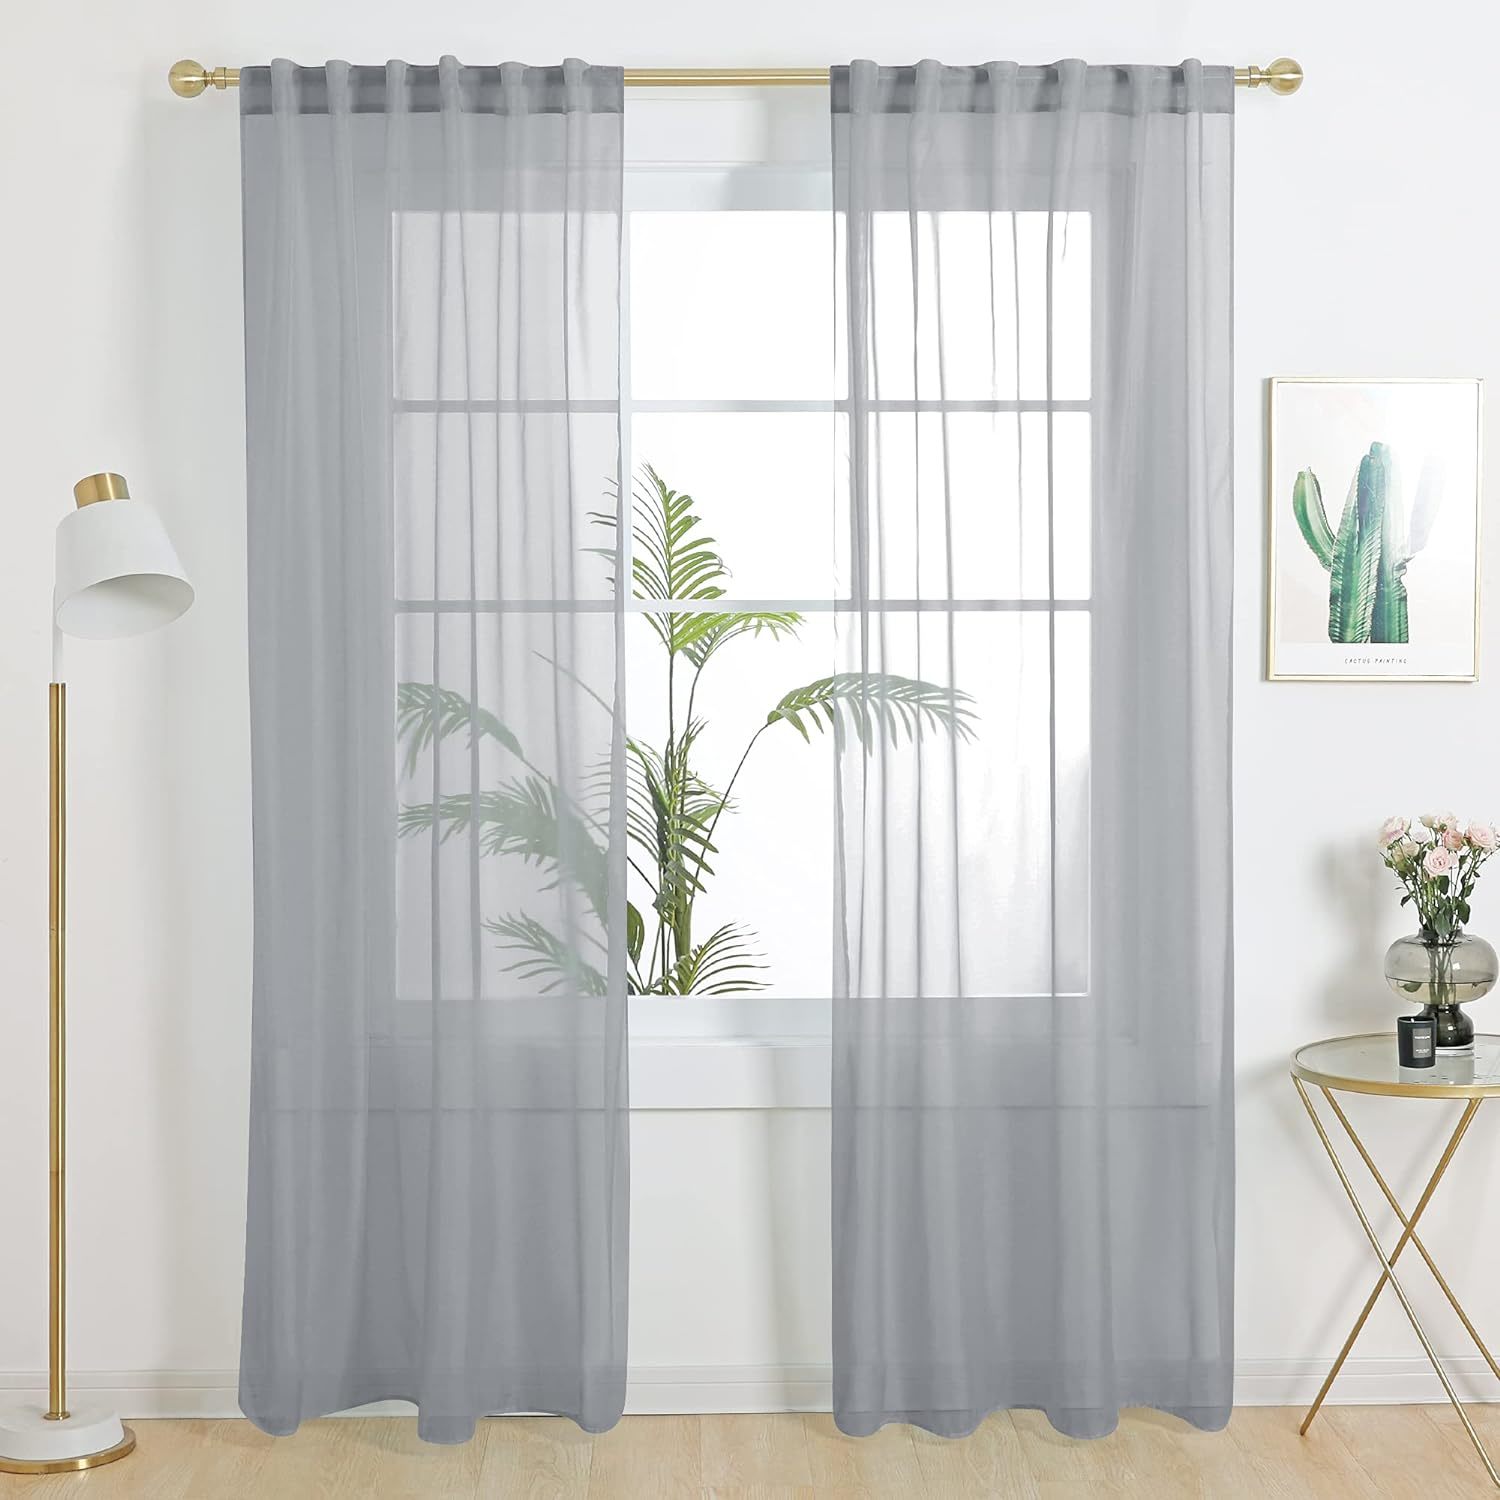 Grey Deconovo Sheer Curtains, Voile Sheer Curtains, Sheer Curtain, 2 Panels. - $35.93